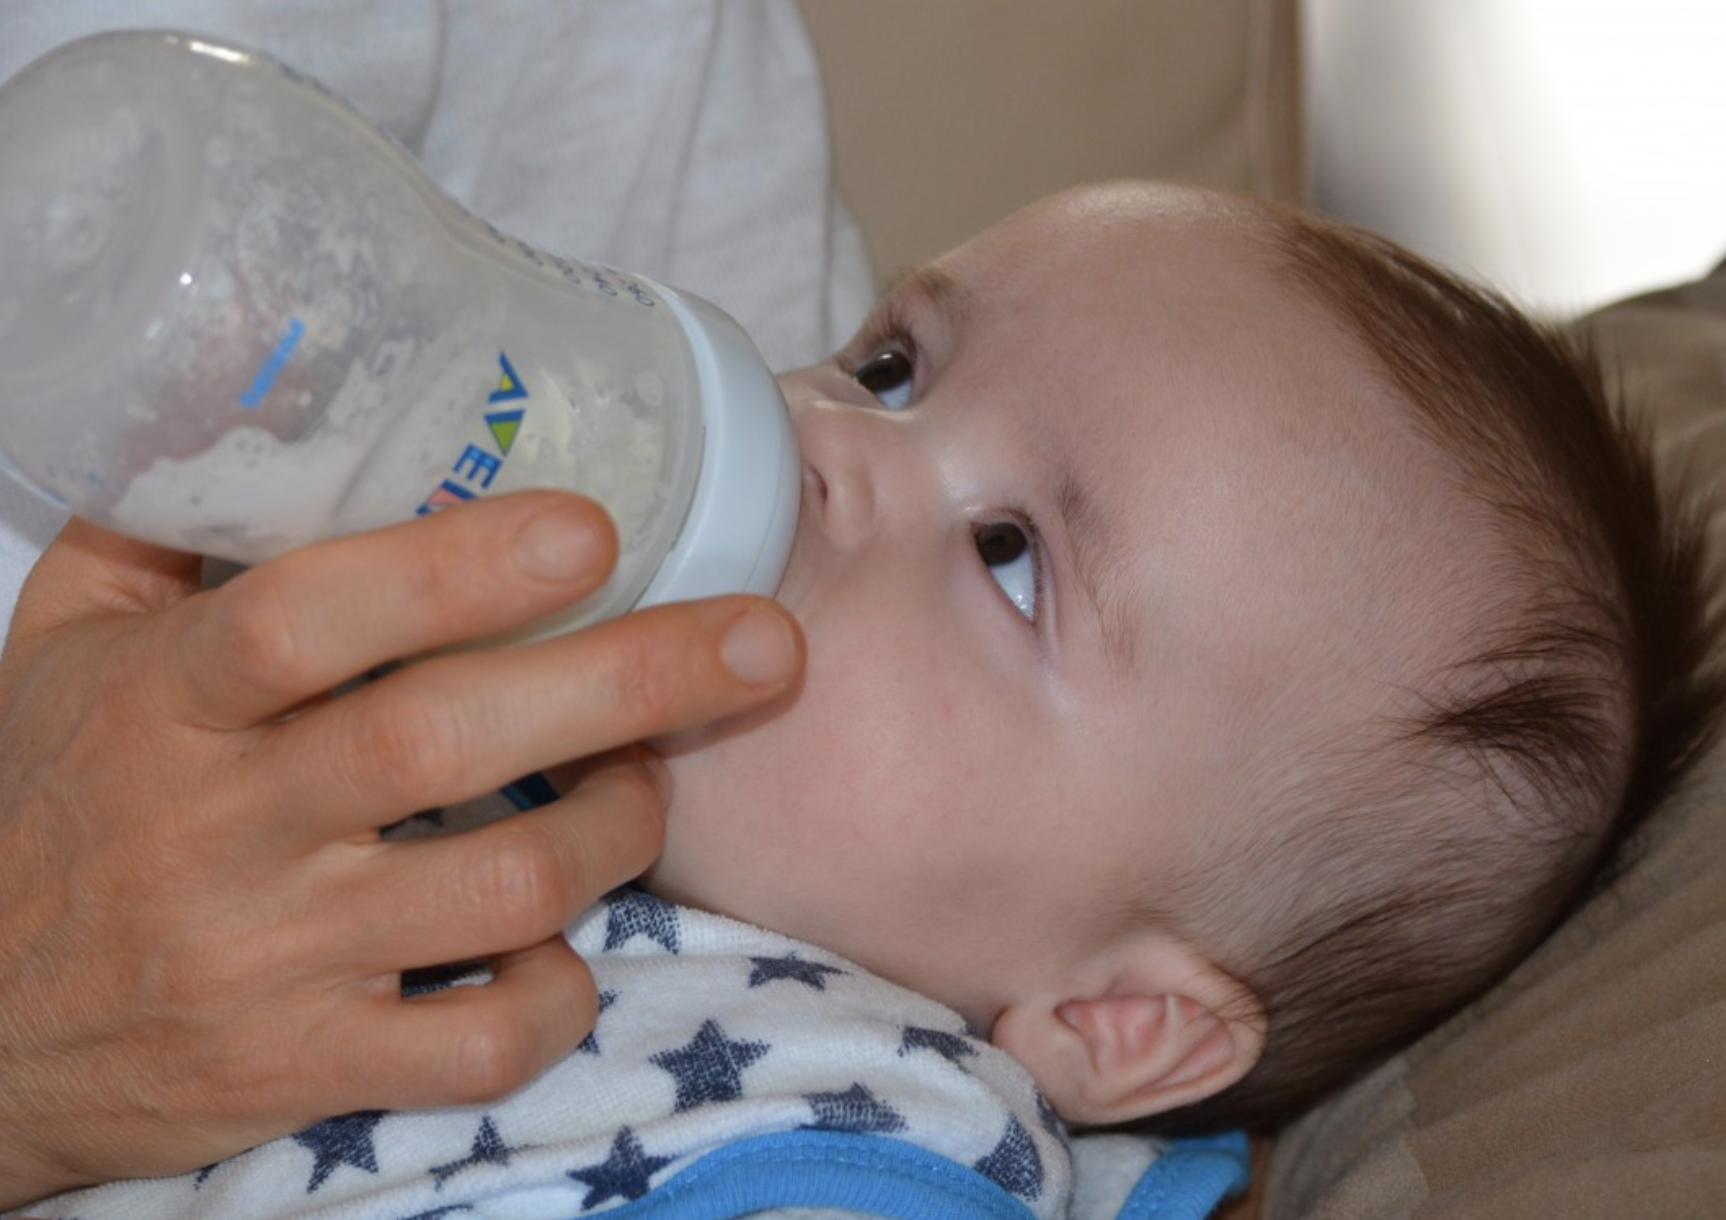 Infant drinking from a bottle